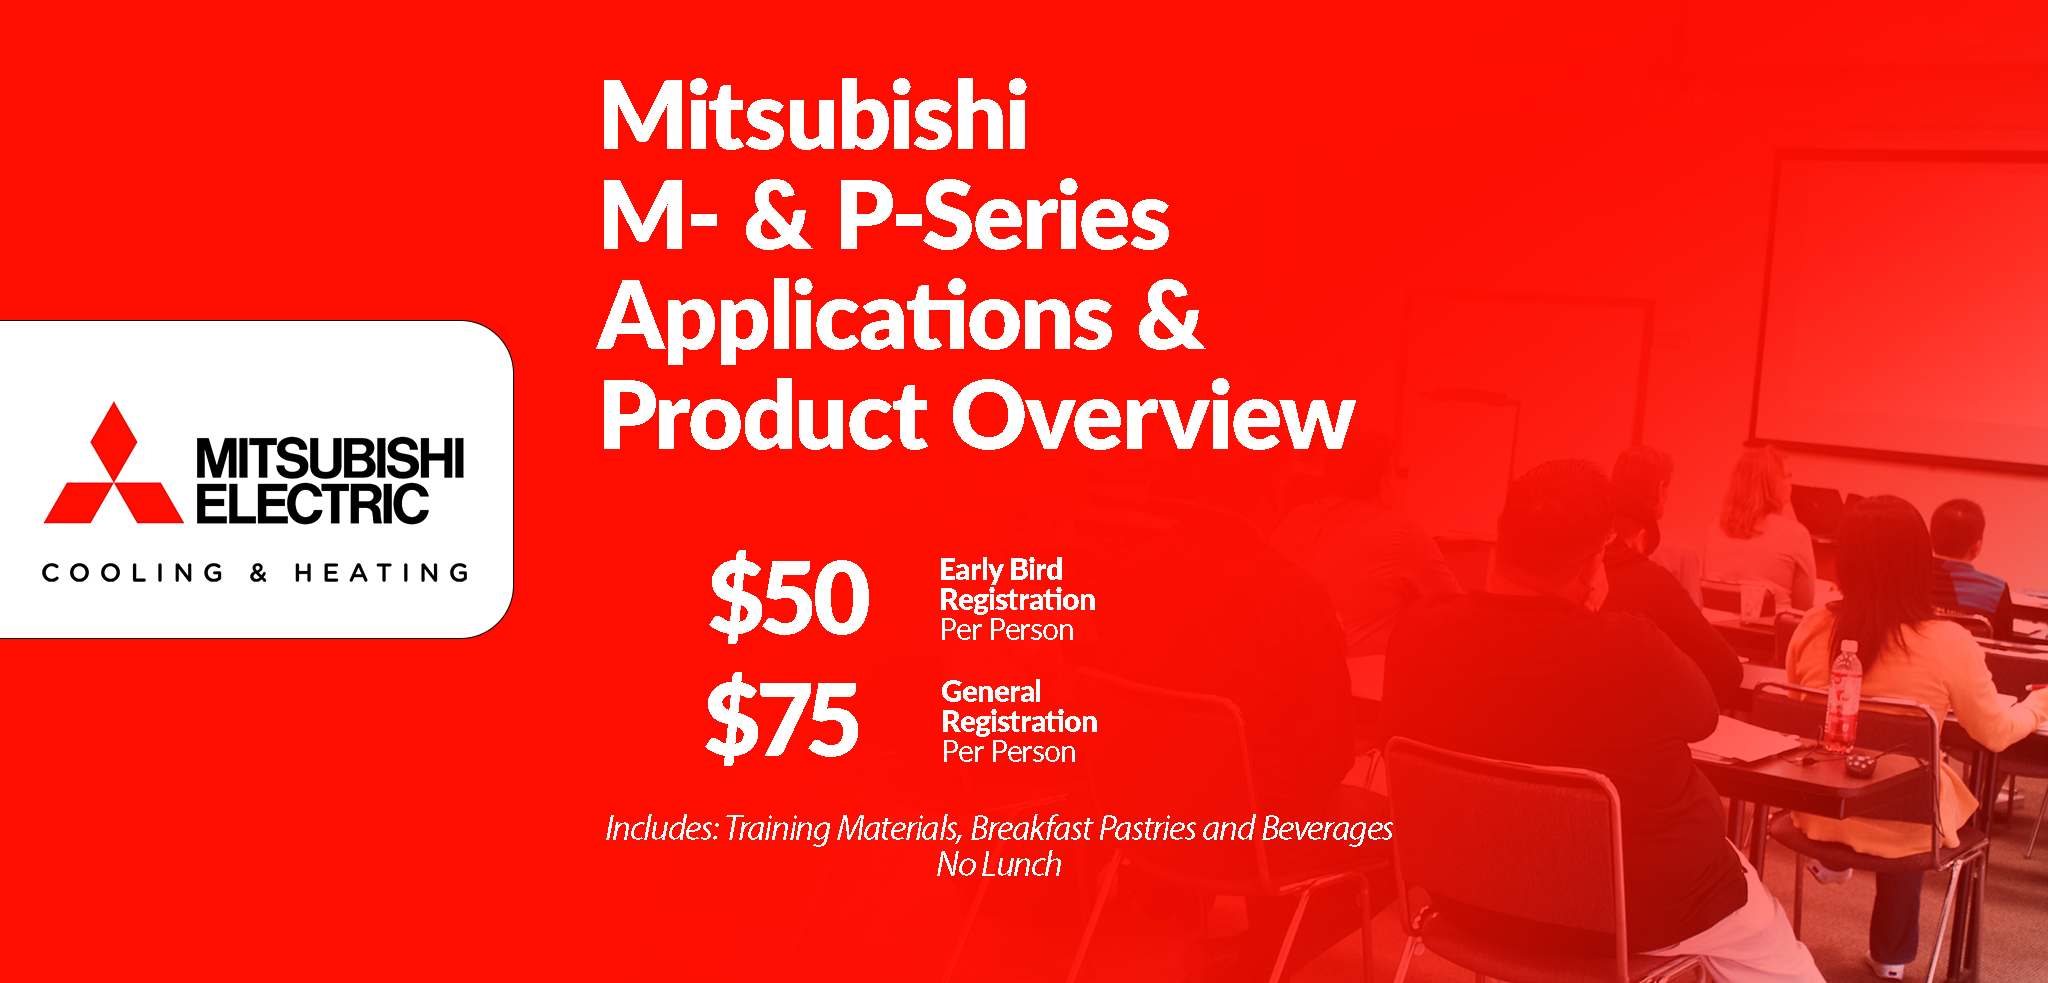 M- & P-Series Applications & Product Overview